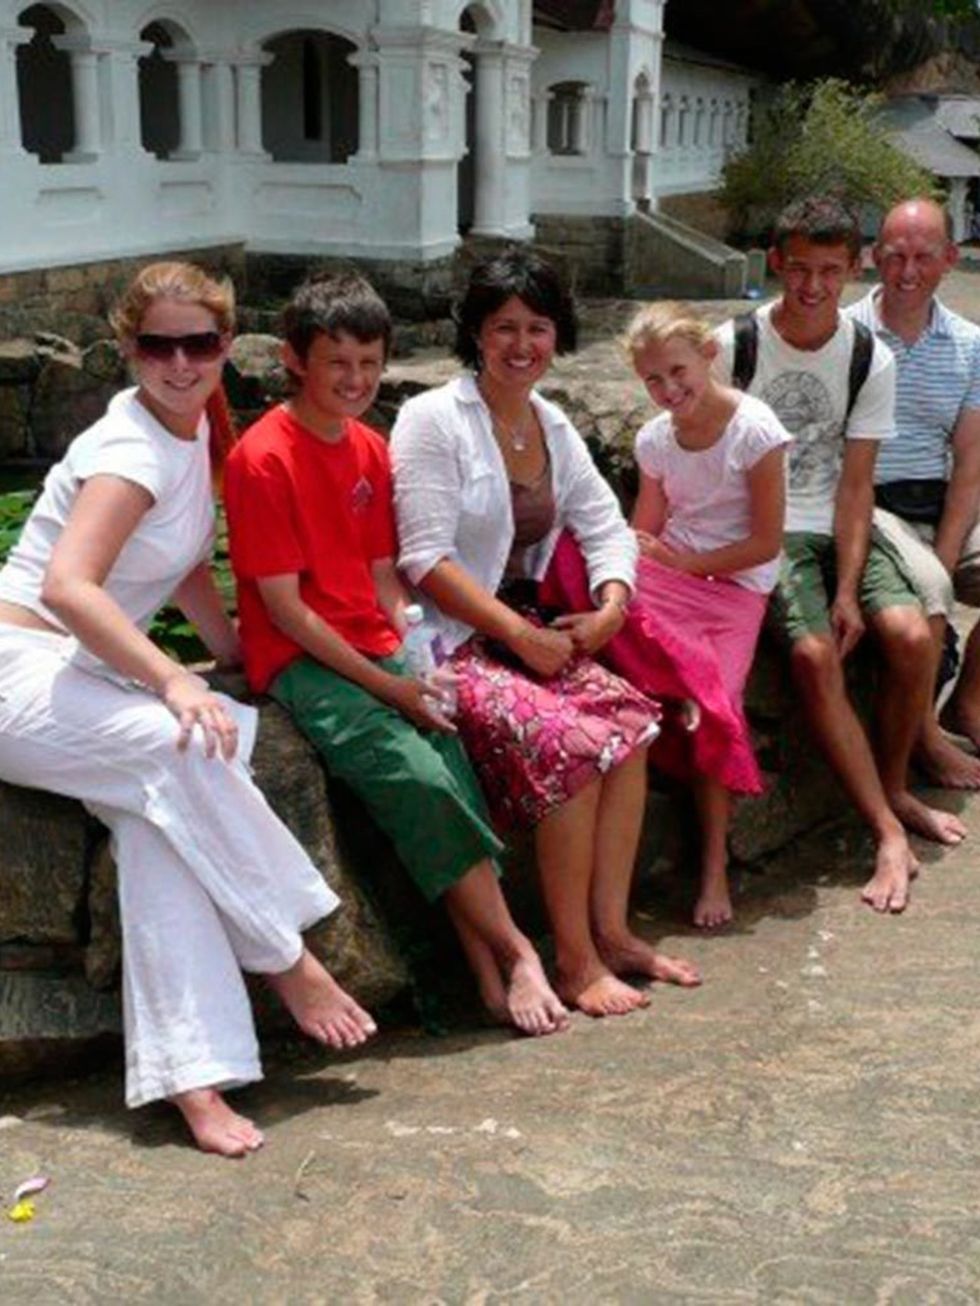 Charlotte Wallace.
 
Here I am with my Mum, Dad brothers and sister at a temple in Sri
Lanka. We went there to see where my grandmother grew up, as her
family are from there. We went to her old house, her local church,  and the disabled
children's home my